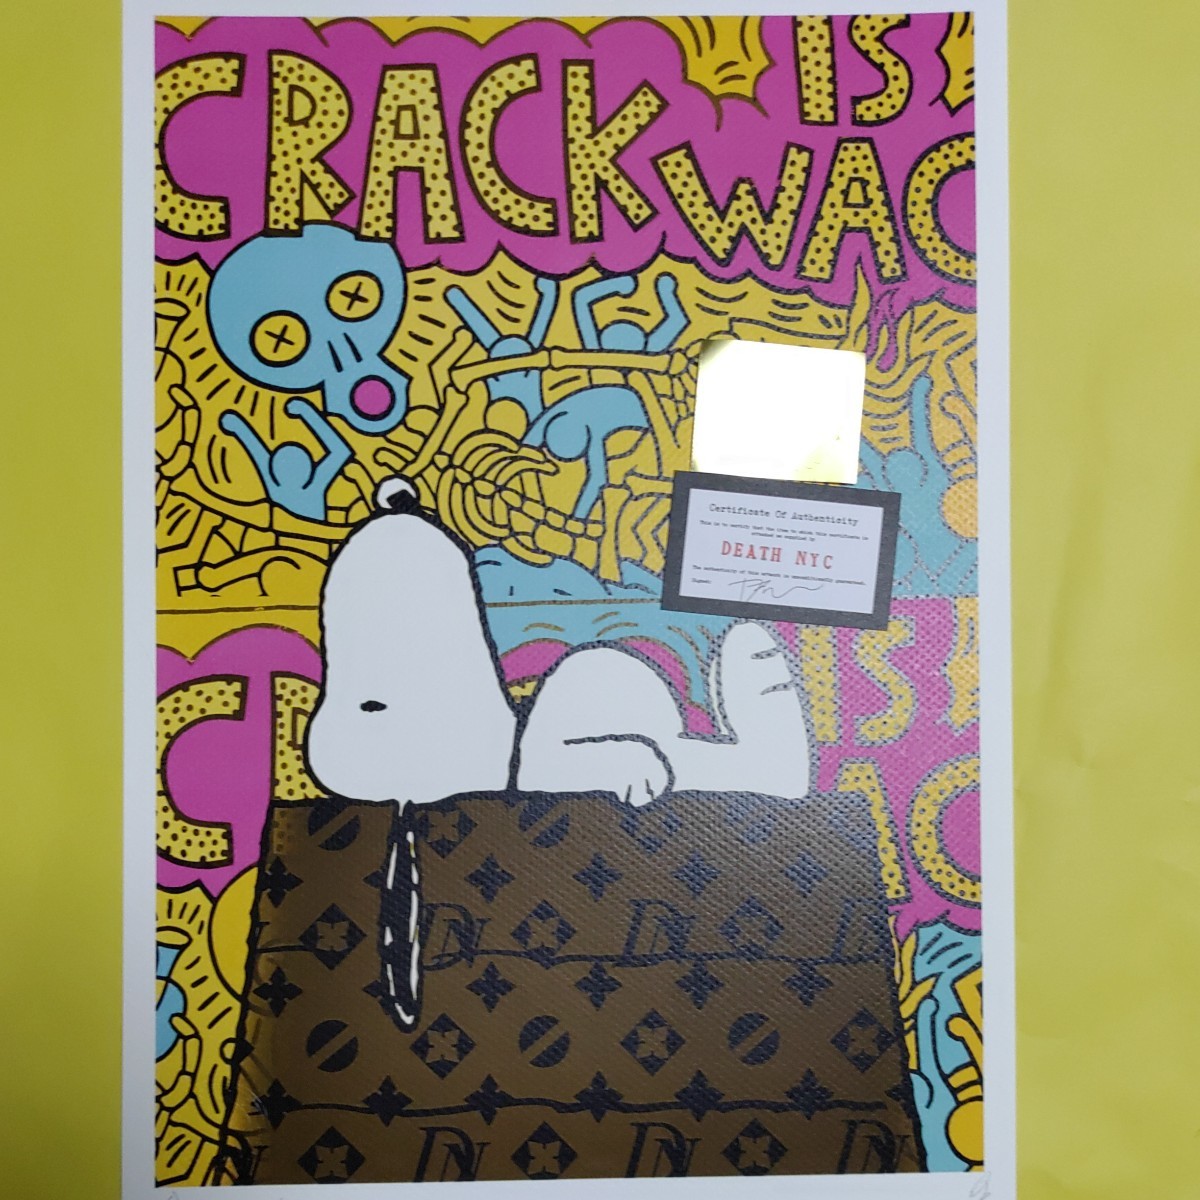 DEATH NYC worldwide limitation 100 sheets art poster Snoopy SNOOPY Keith he ring Keith Haring Louis Vuitton LOUISVUITTON Tom eba Heart 